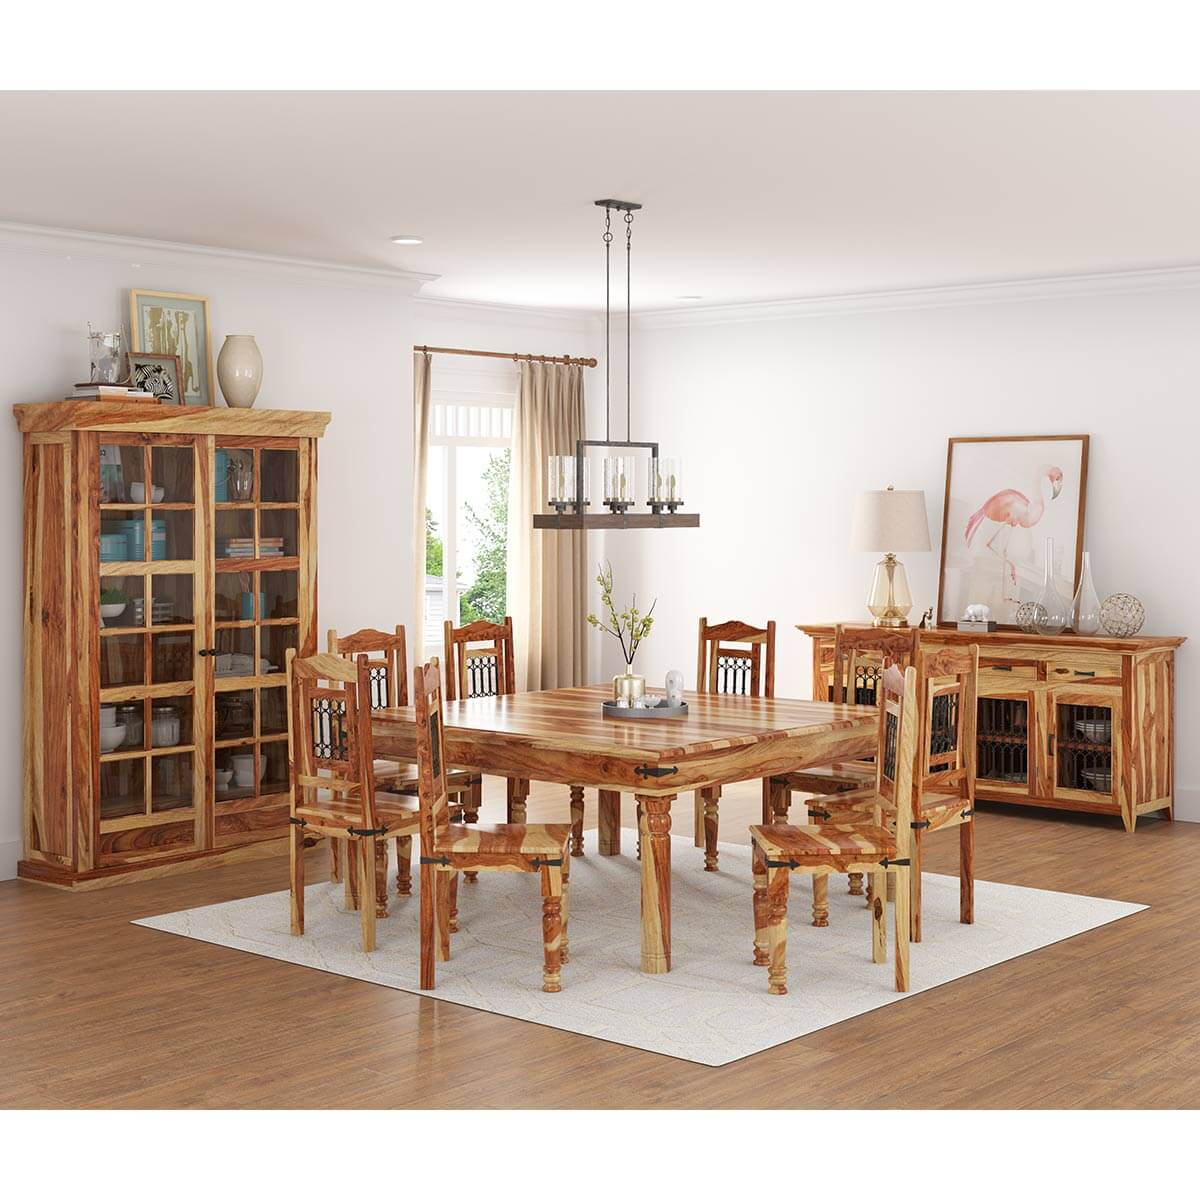 Peoria Rustic Solid Wood 11 Piece Square Dining Room Set within size 1200 X 1200